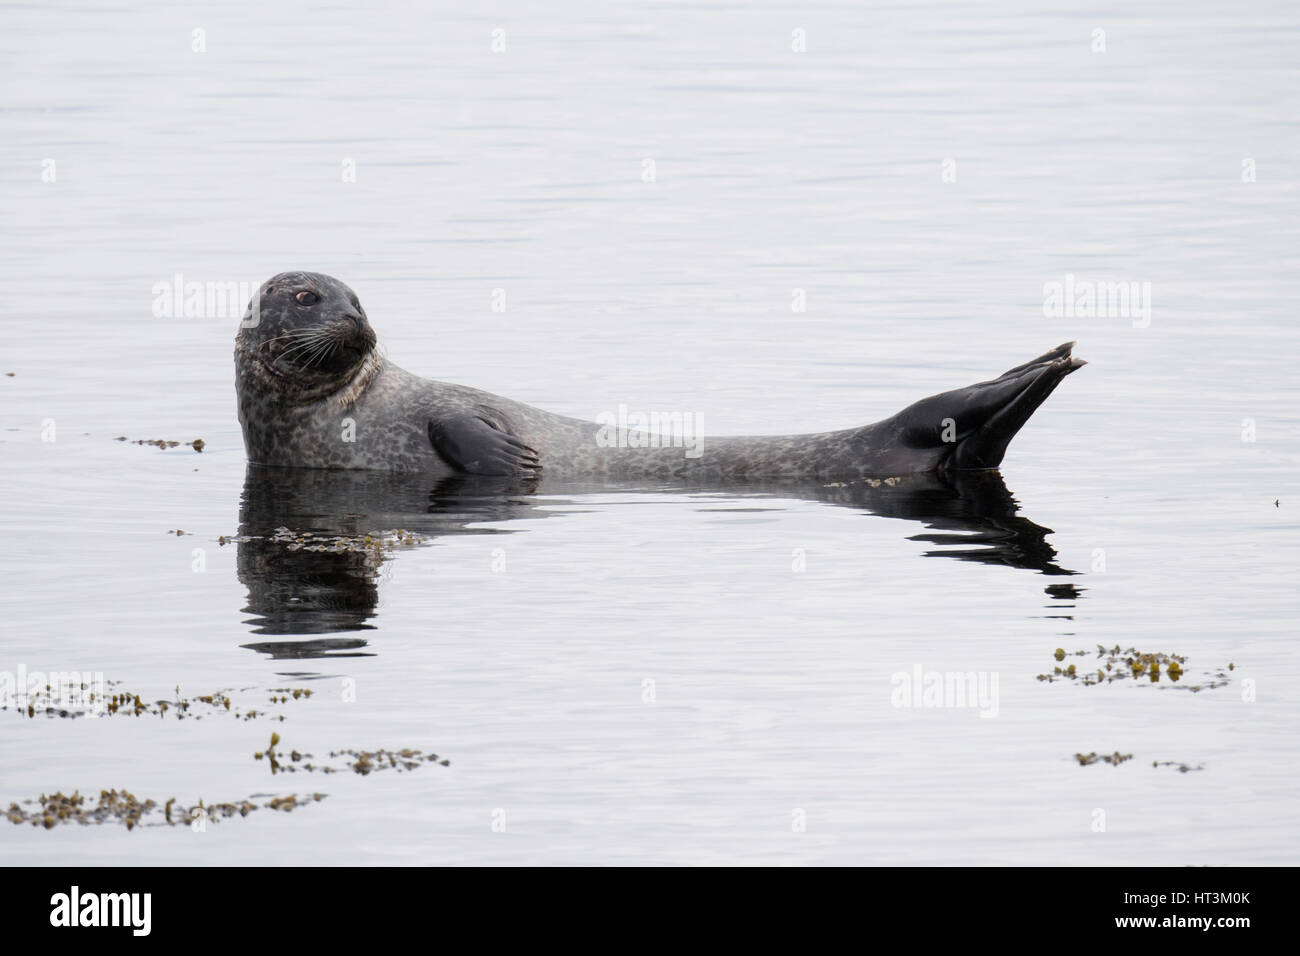 Harbor or harbour or Common seal, Phoca vitulina, portrait, at Isafjordur, Northern Iceland, North Atlantic Ocean Stock Photo